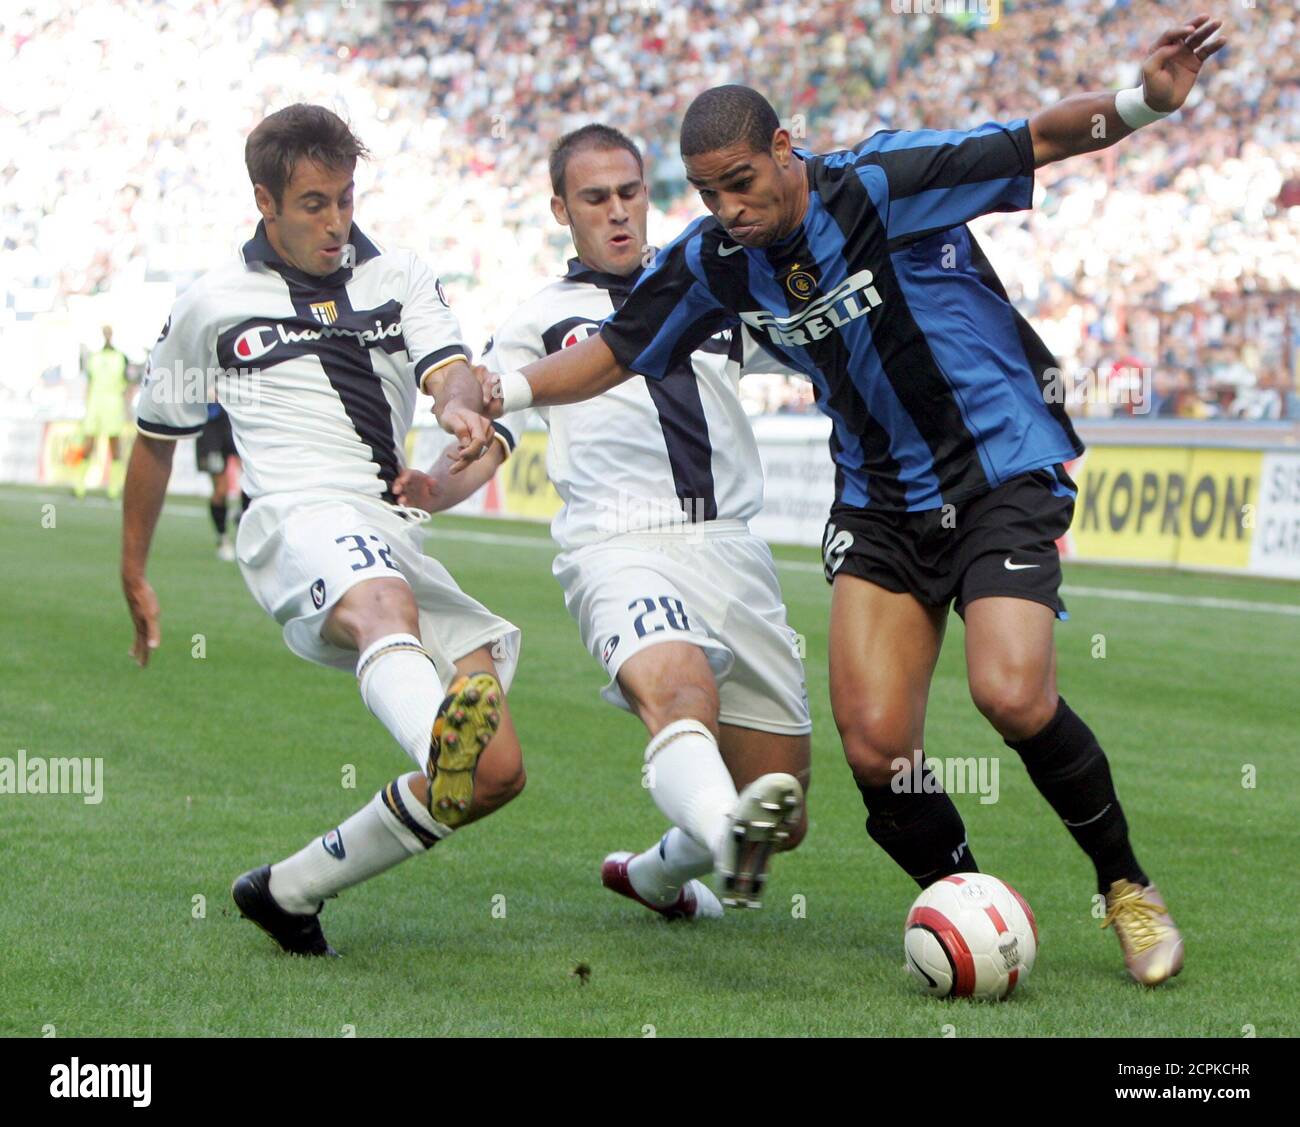 Inter Milan Adriano (R) challenges Marco Marchionni (L) and Paolo Cannavaro of Parma during their serie A match at the San Siro stadium in Milan, northern Italy September 26, 2004. Inter Milan vs Parma 2-2 draw. REUTERS/Stefano Rellandini  SR/ACM Stock Photo